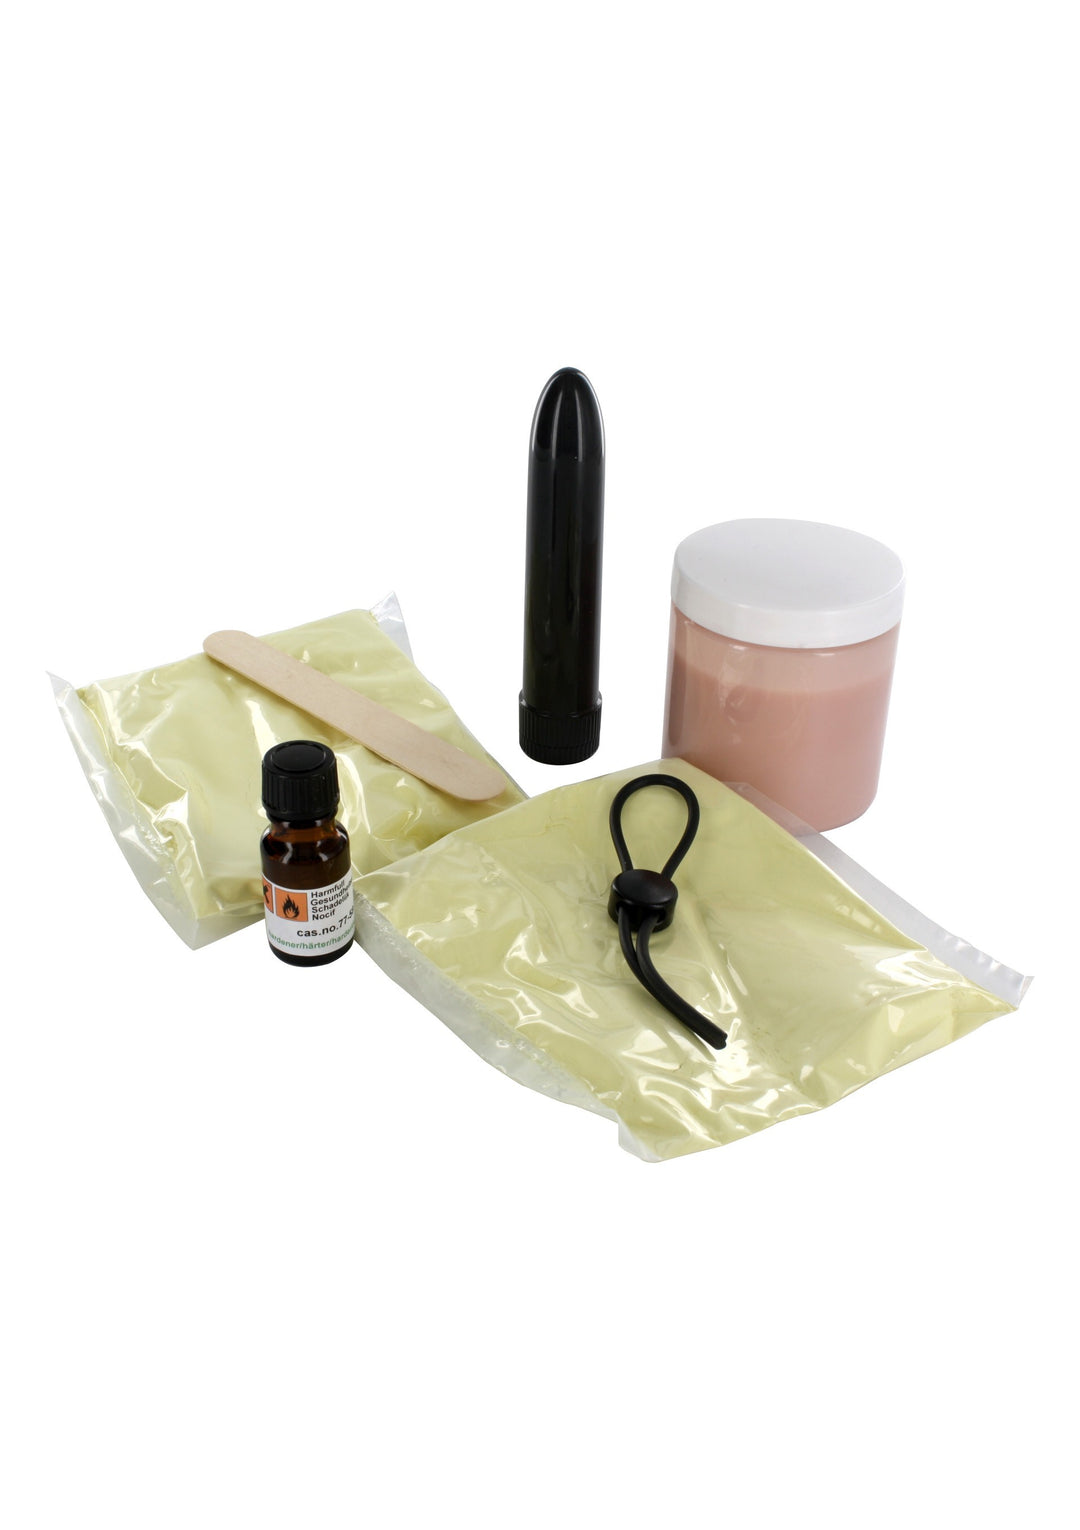 mold kit to create your own personalized clone boy vibrating dildo vibrator